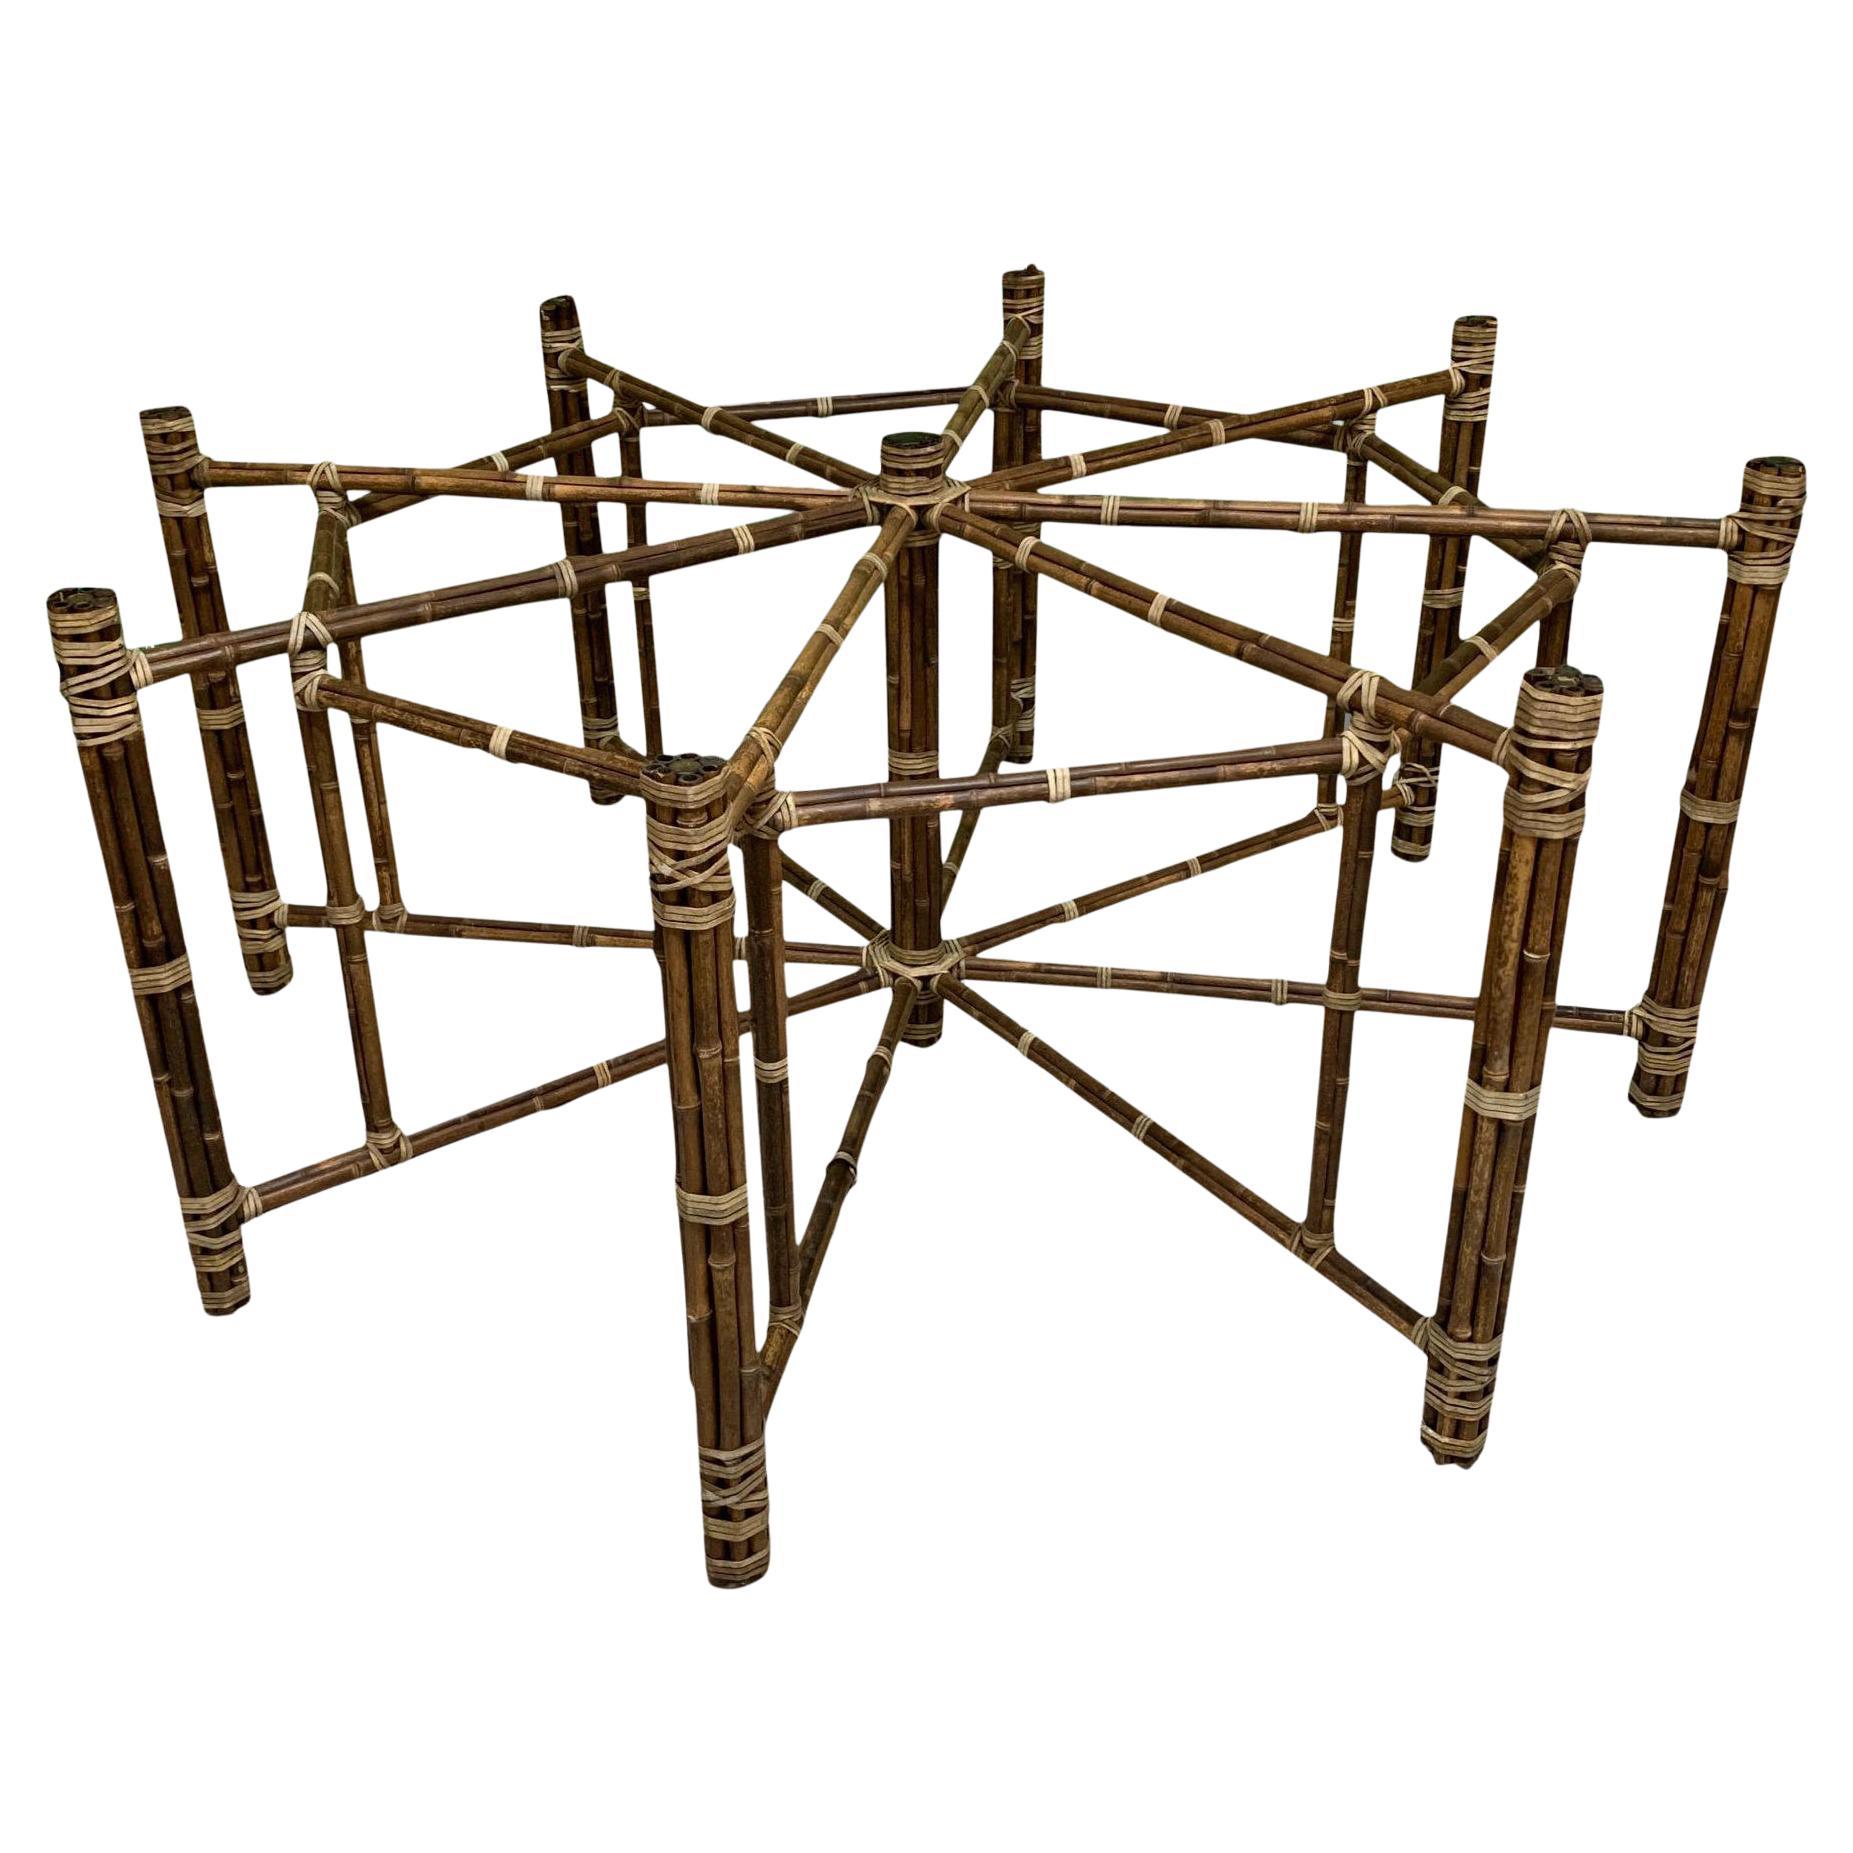 McGuire Bamboo and Raw Hide Hexagonal Dining Table